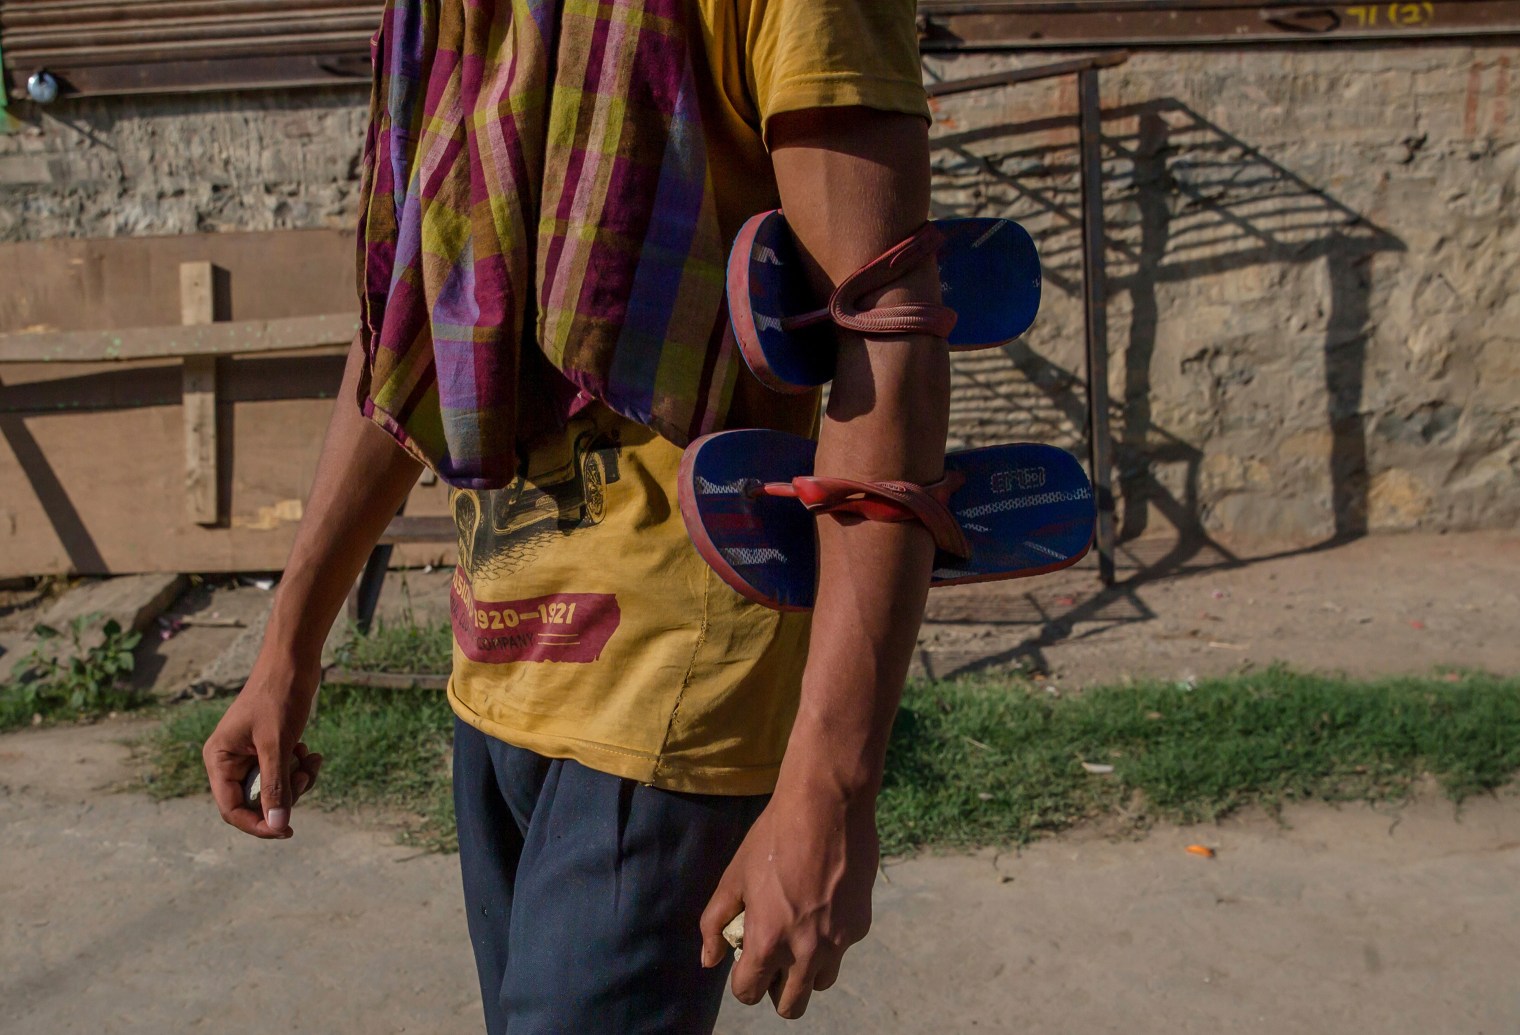 A villager has his slippers tied to his arm as he holds stones before throwing them at Indian policemen to protest during the funeral procession of a civilian Tanveer Ahmed Wani, in Beerwah about 25 miles (40 km.) west of Srinagar on July 21, 2017. The Indian army fired at worshippers outside a mosque in disputed Kashmir on Friday, killing one man and injuring another, after some threw rocks, police and residents said.